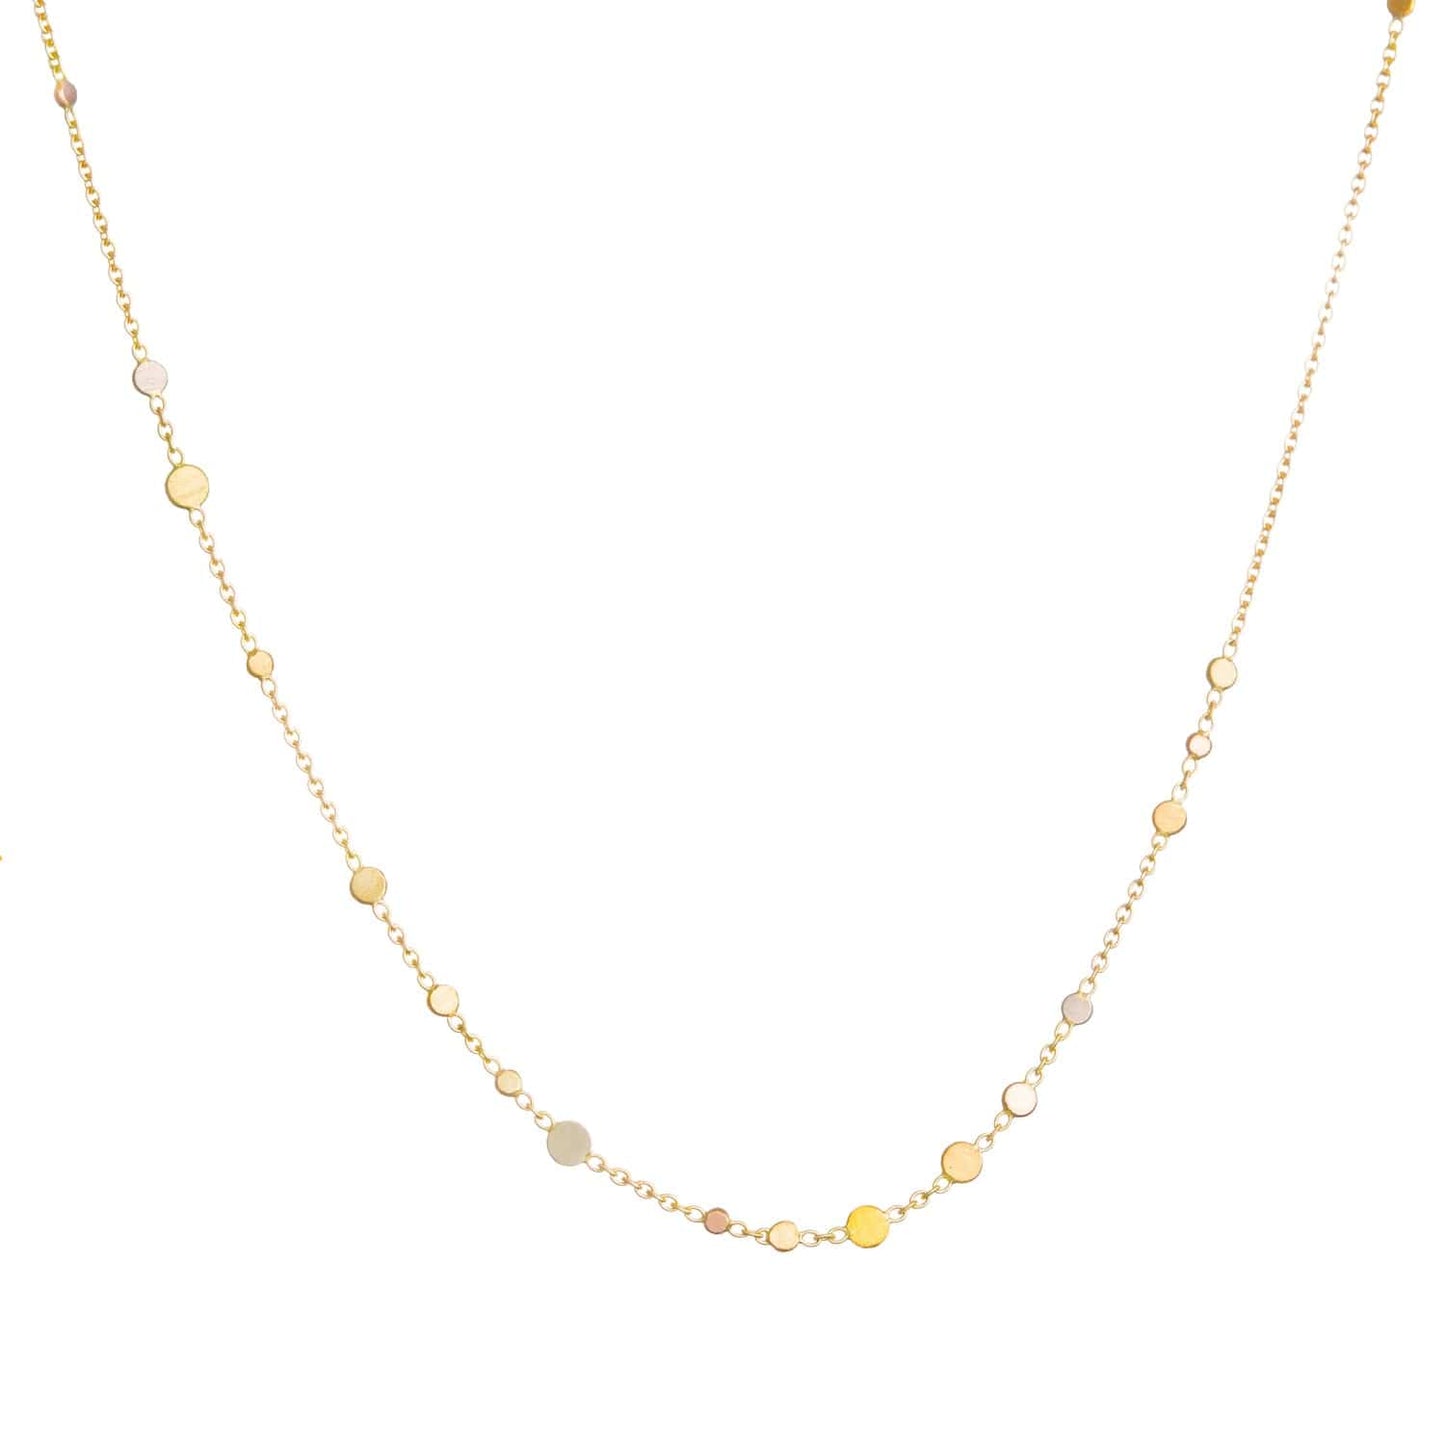 NKL-18K 18k Yellow & Rainbow Gold Scattered Rainbow Dust Necklace